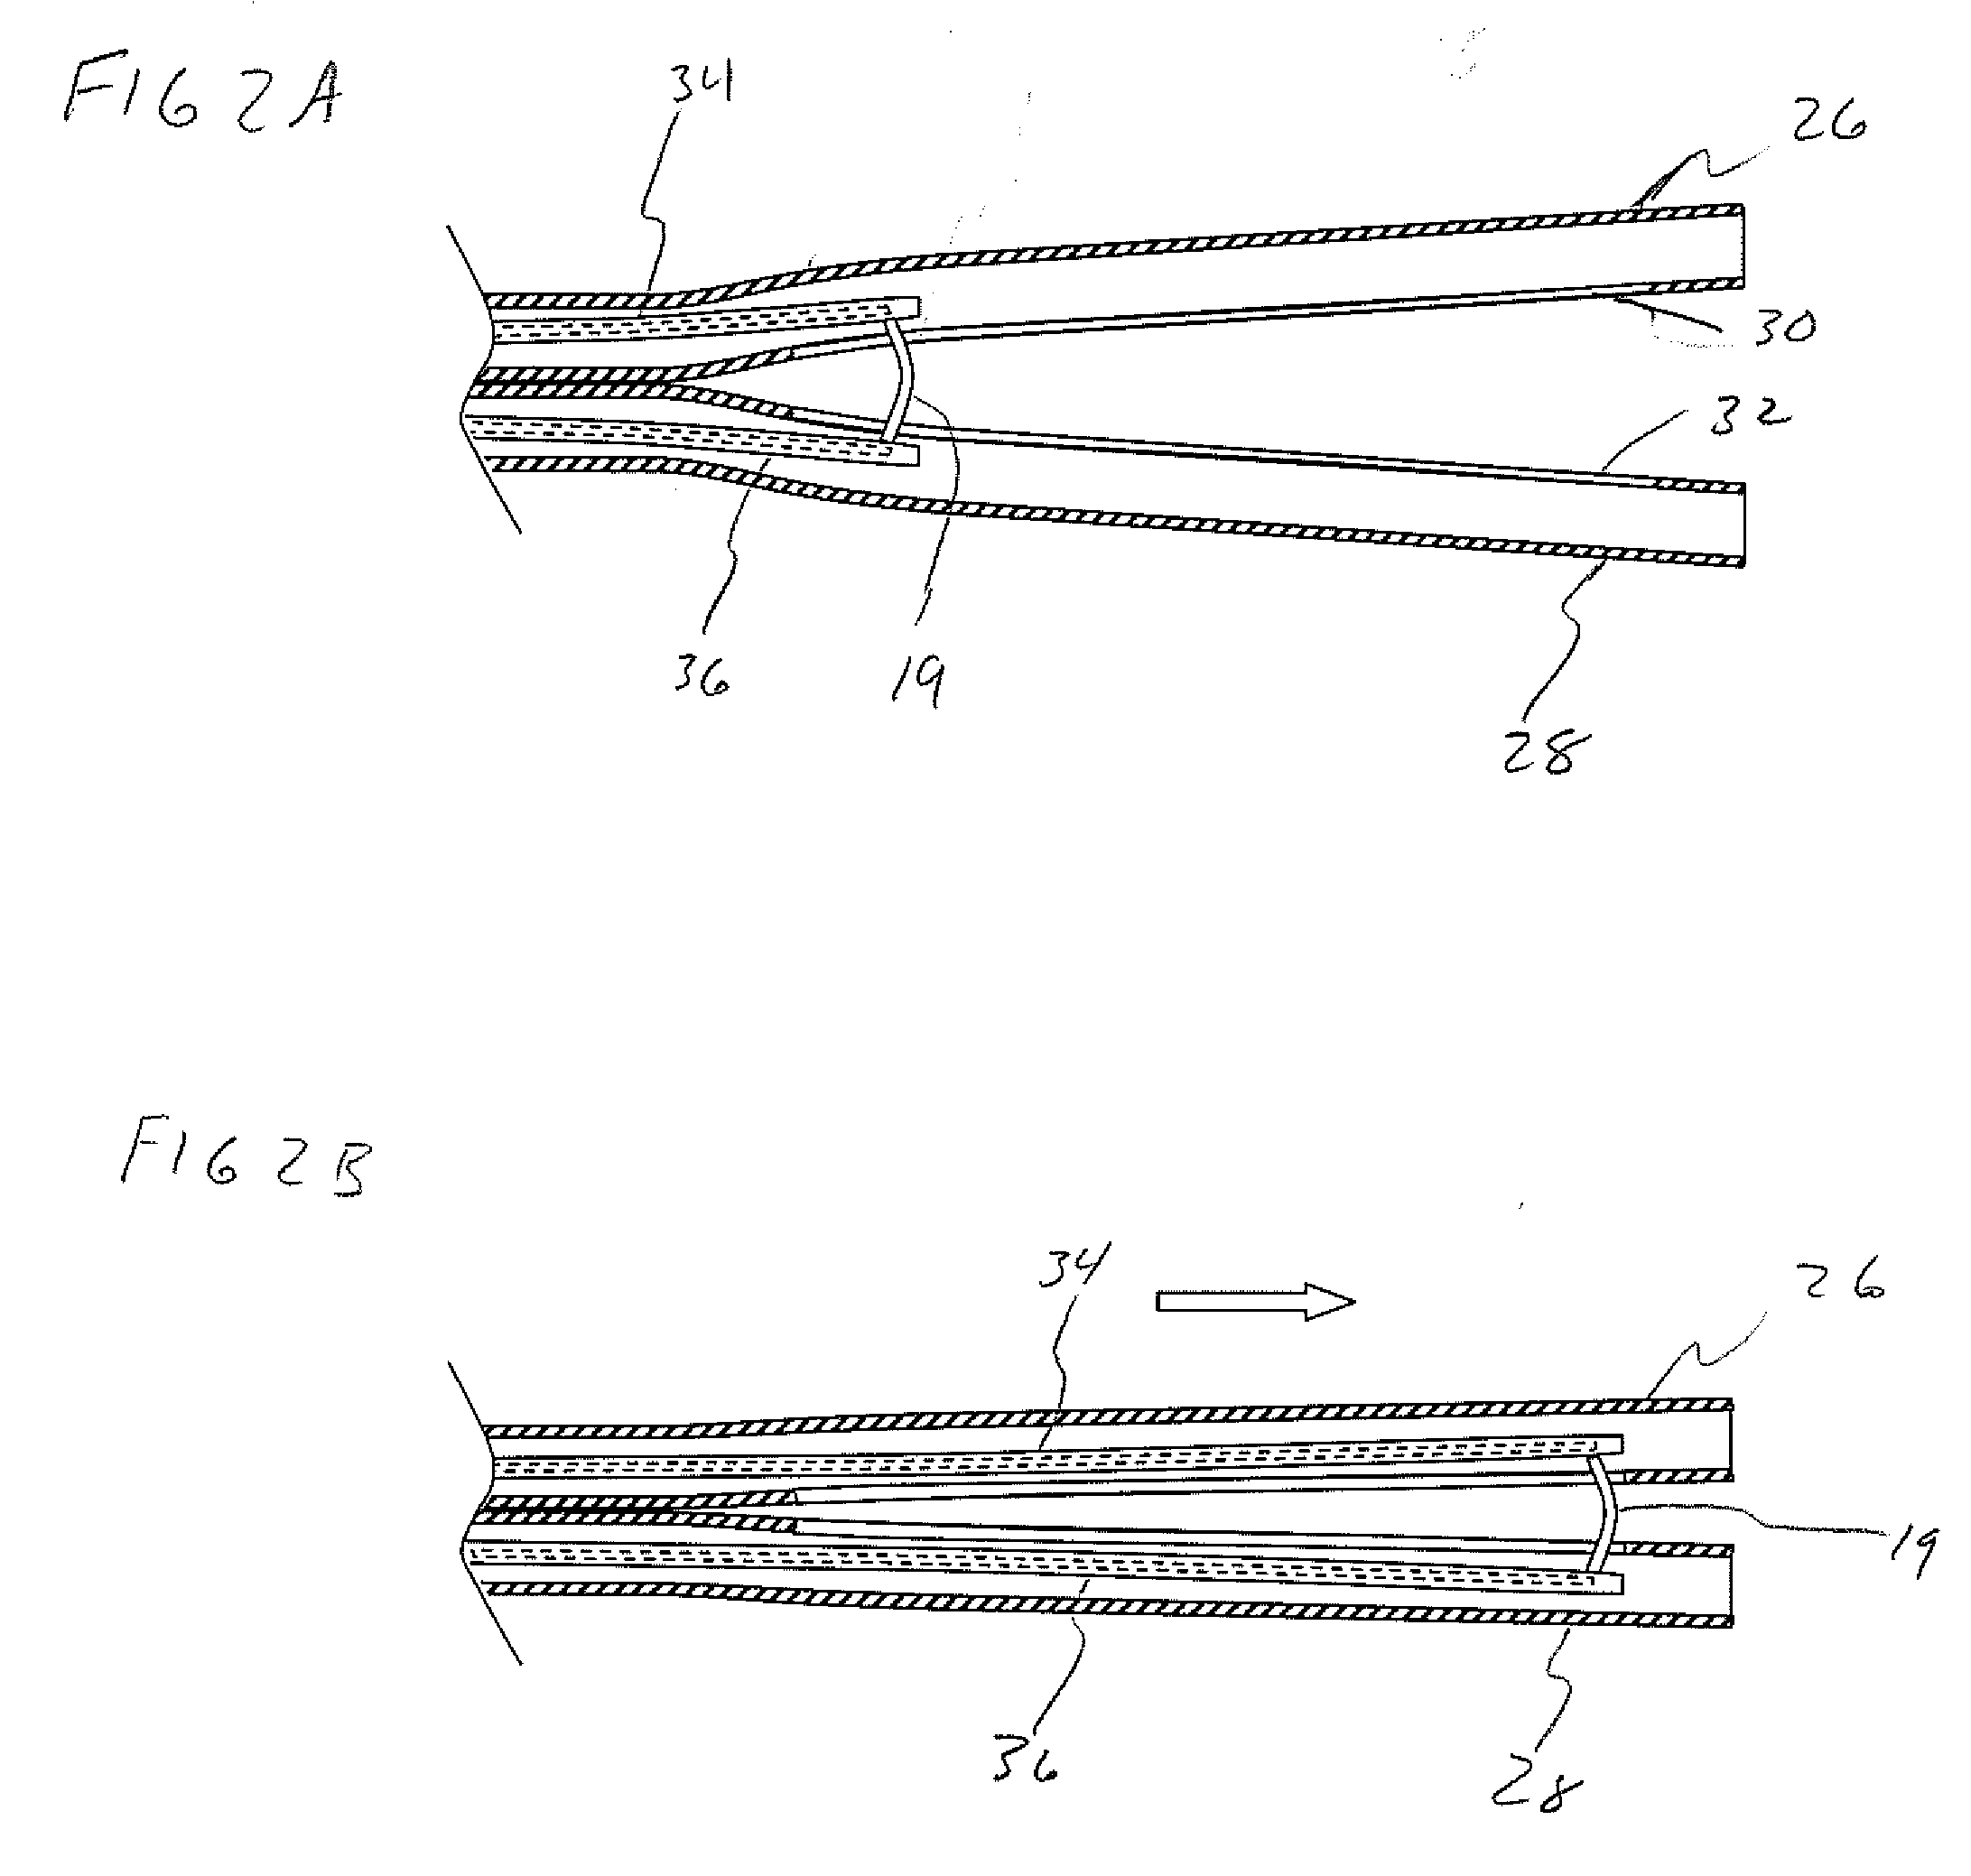 Tissue Resection Device